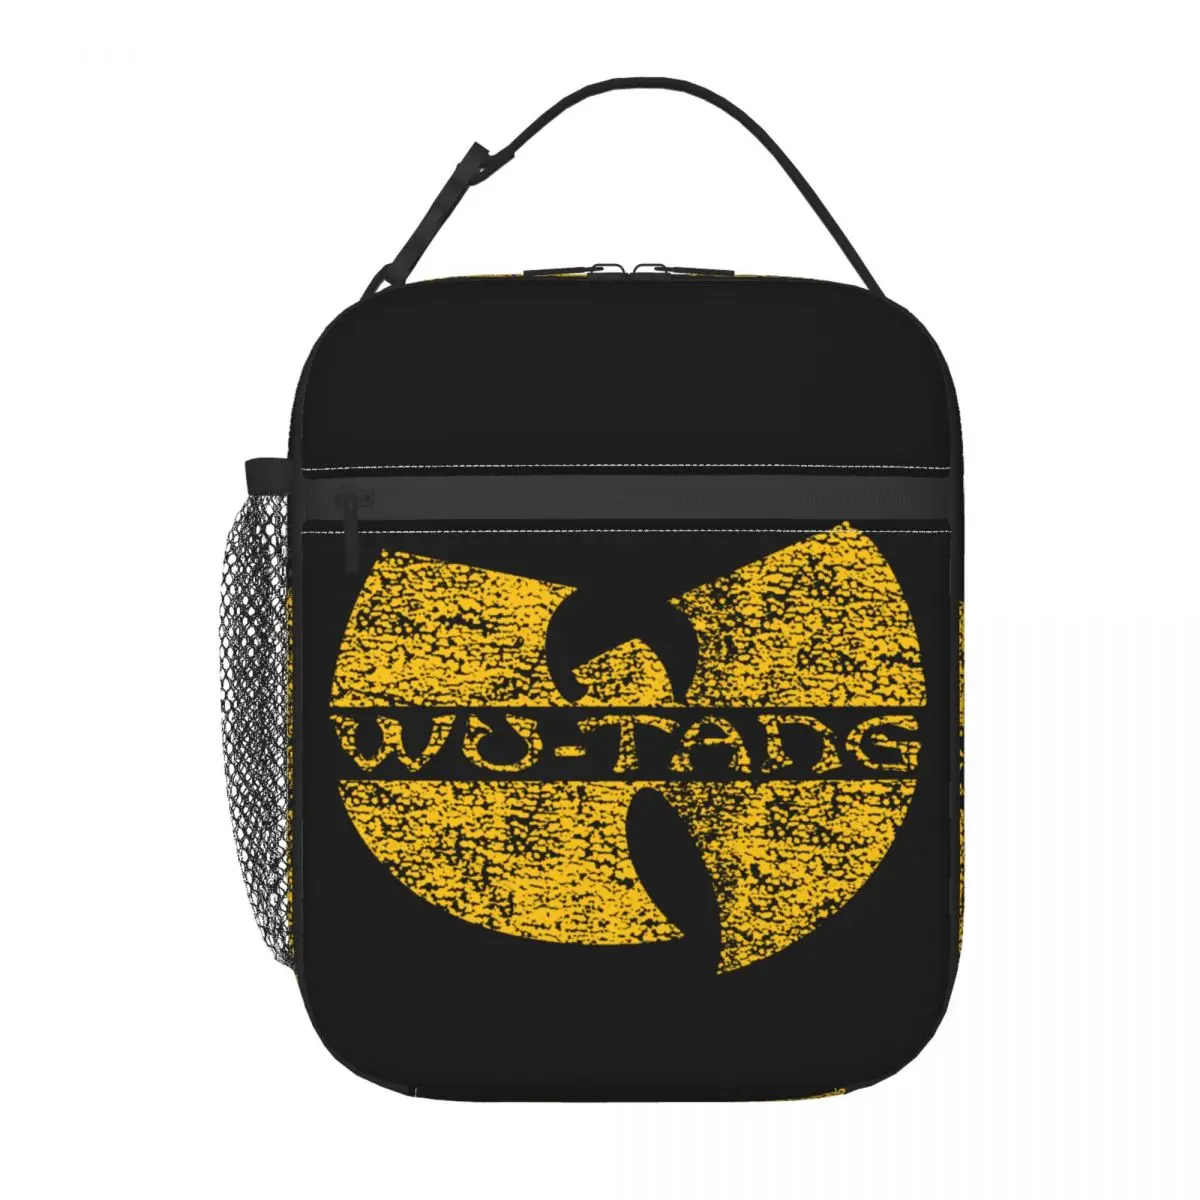 

Rap Hip Hop Group Wu Clan Insulated Lunch Bag for Women Resuable Cooler Thermal Bento Box Beach Camping Travel